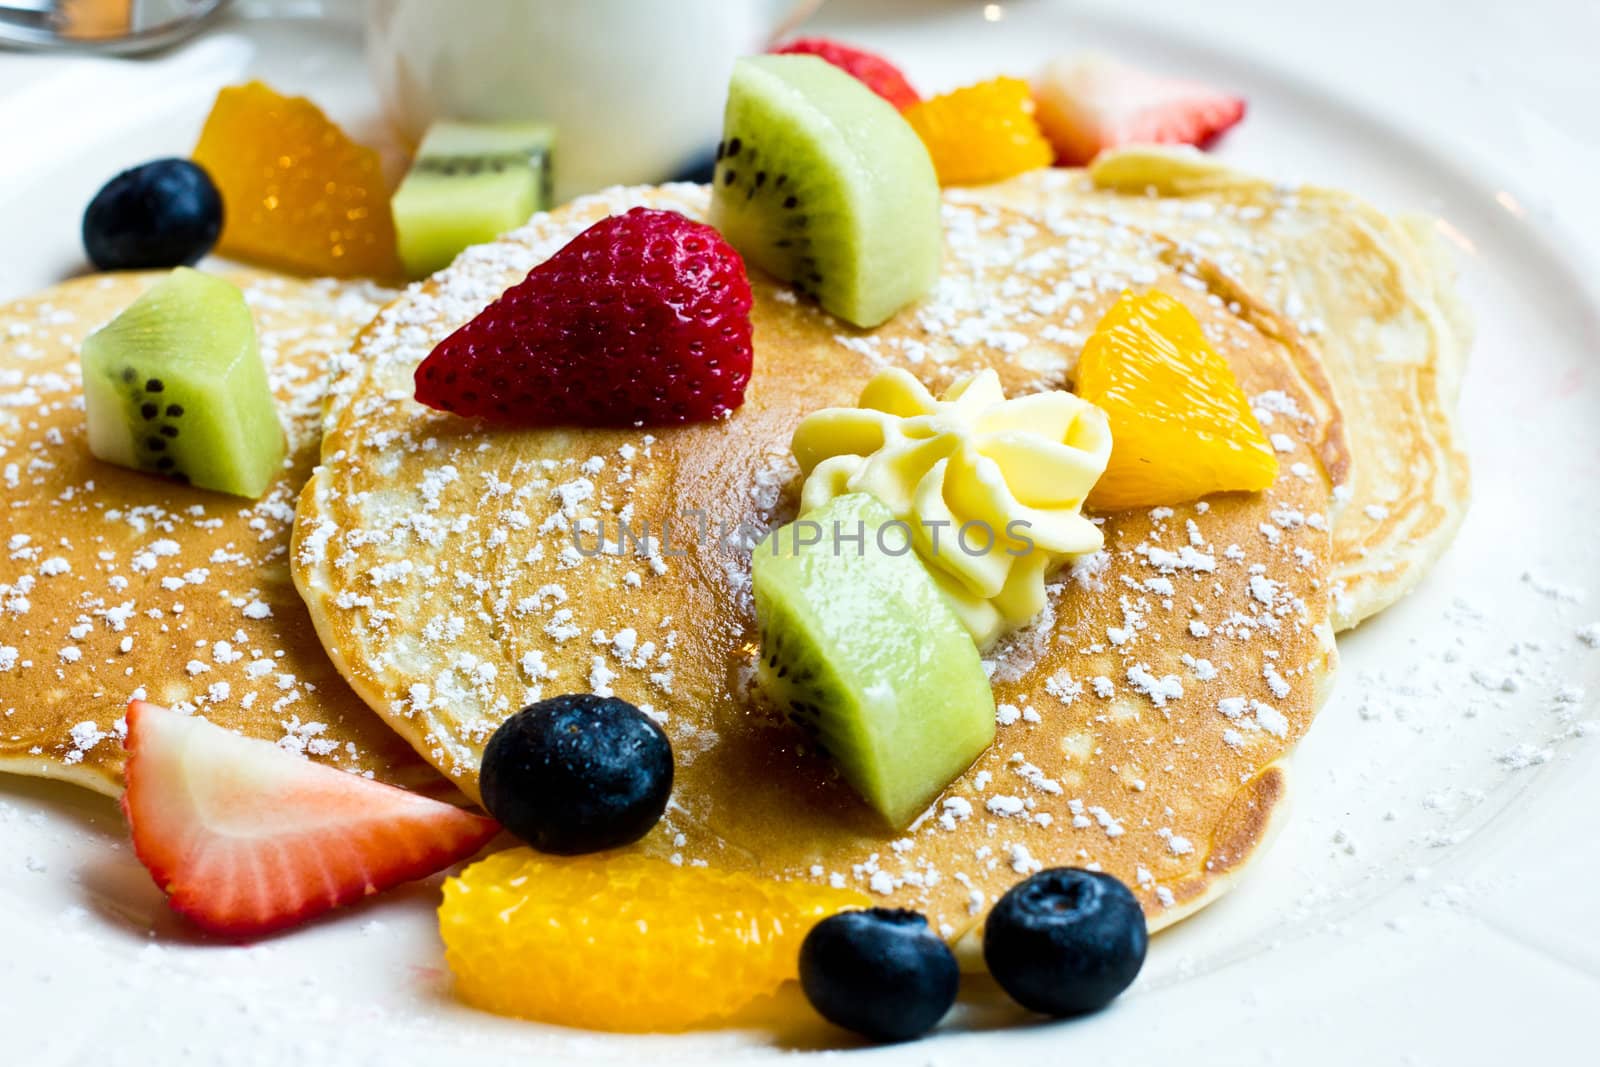 Pancake with fresh fruit by cameracantabile